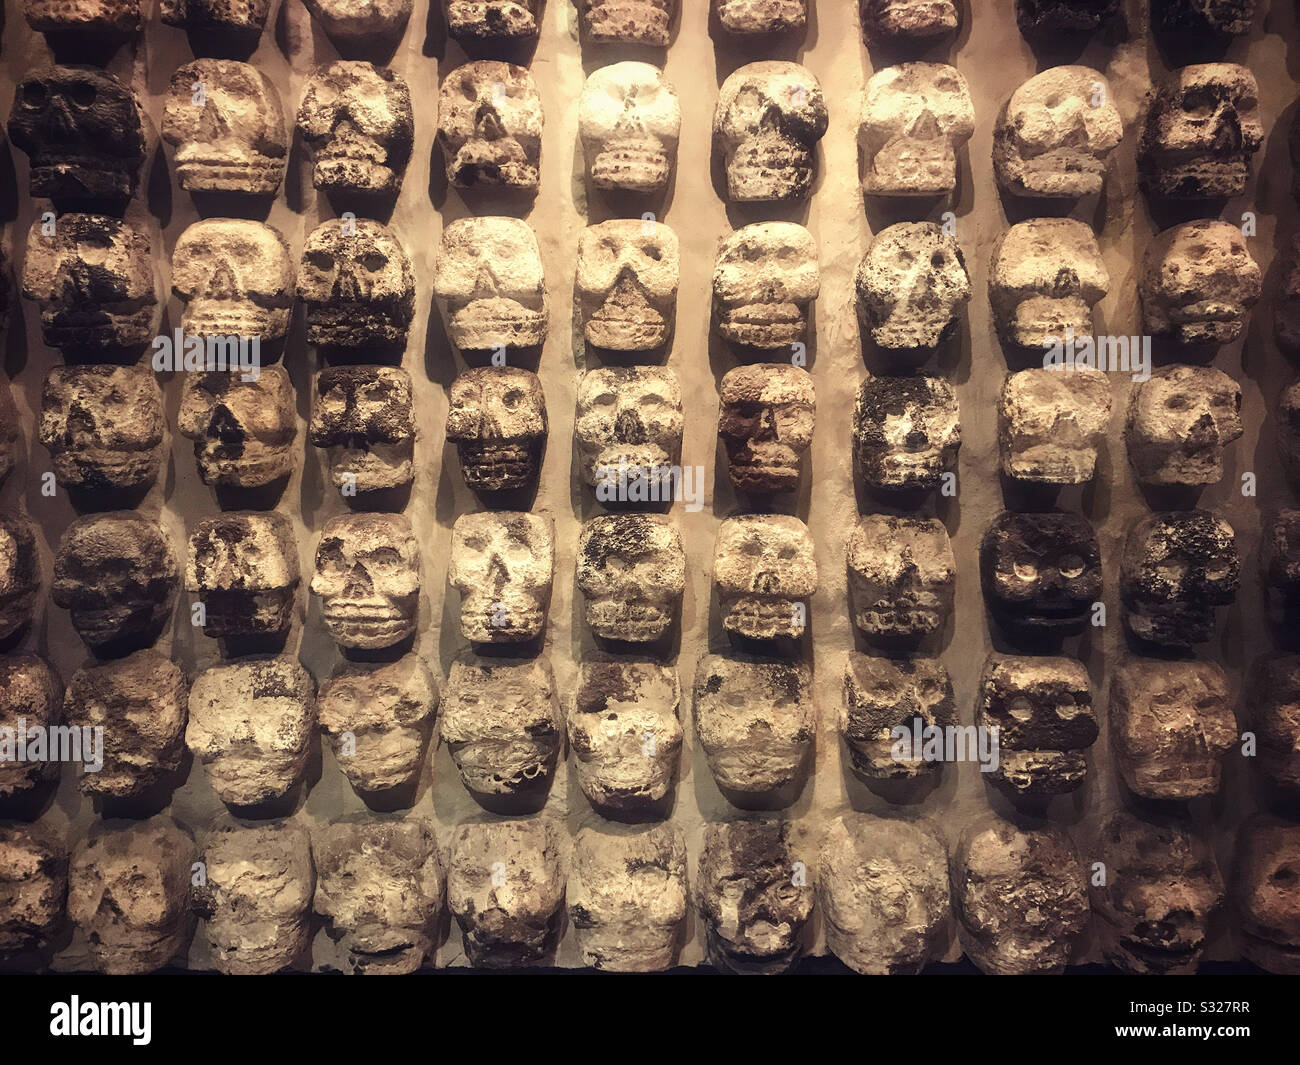 Skulls, representing a human sacrifice, is displayed in the Templo Mayor museum in Mexico City, Mexico Stock Photo